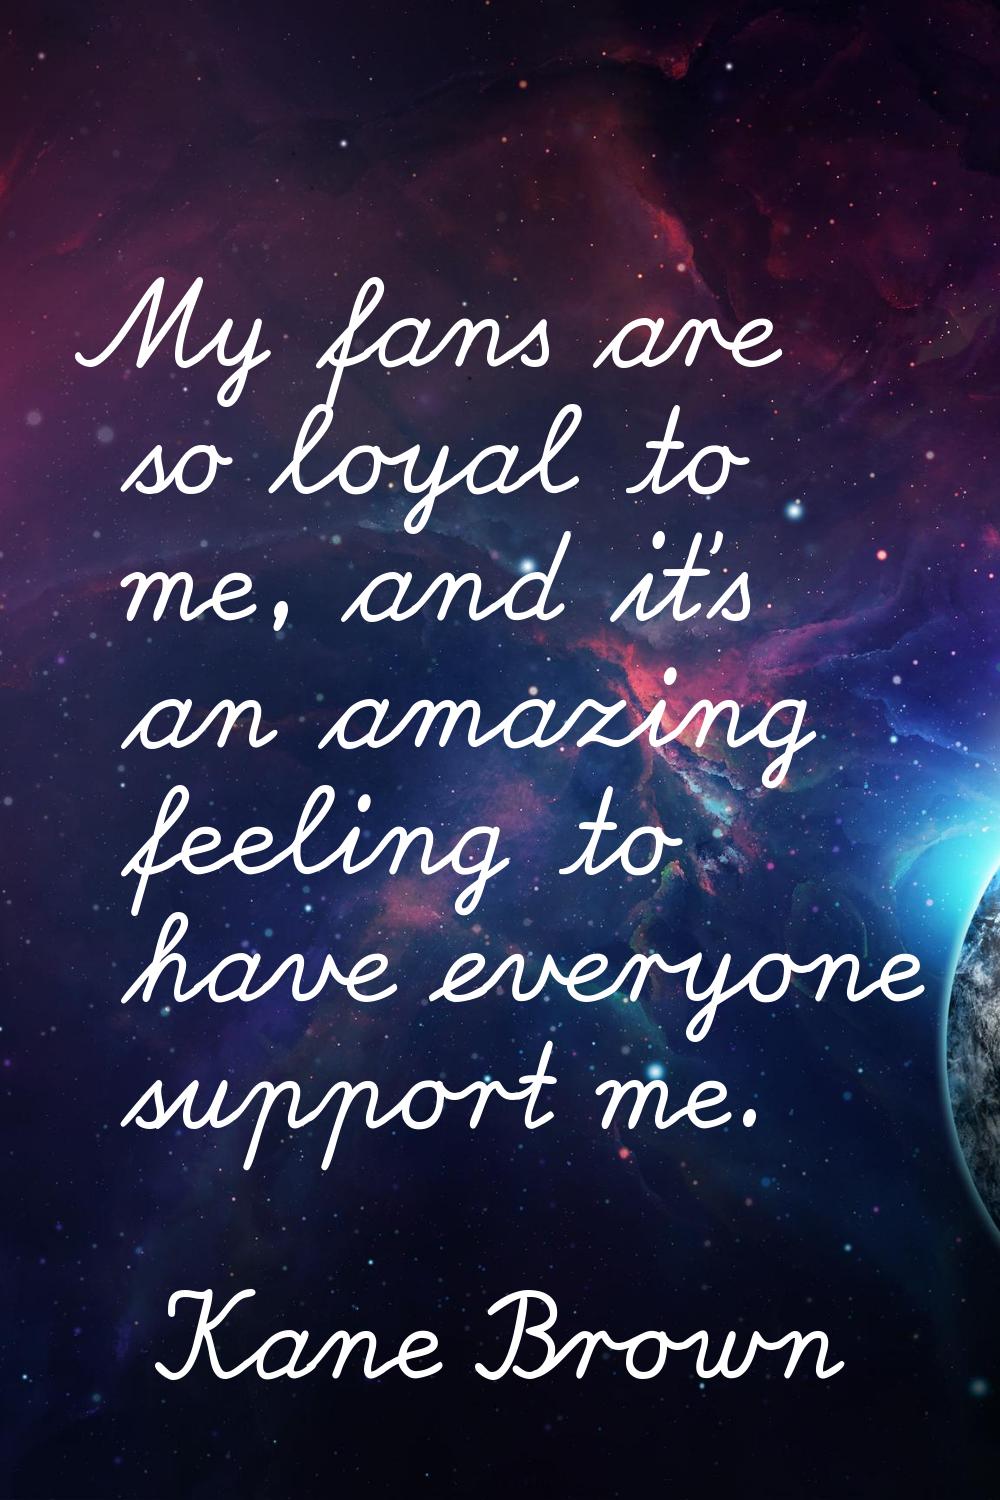 My fans are so loyal to me, and it's an amazing feeling to have everyone support me.